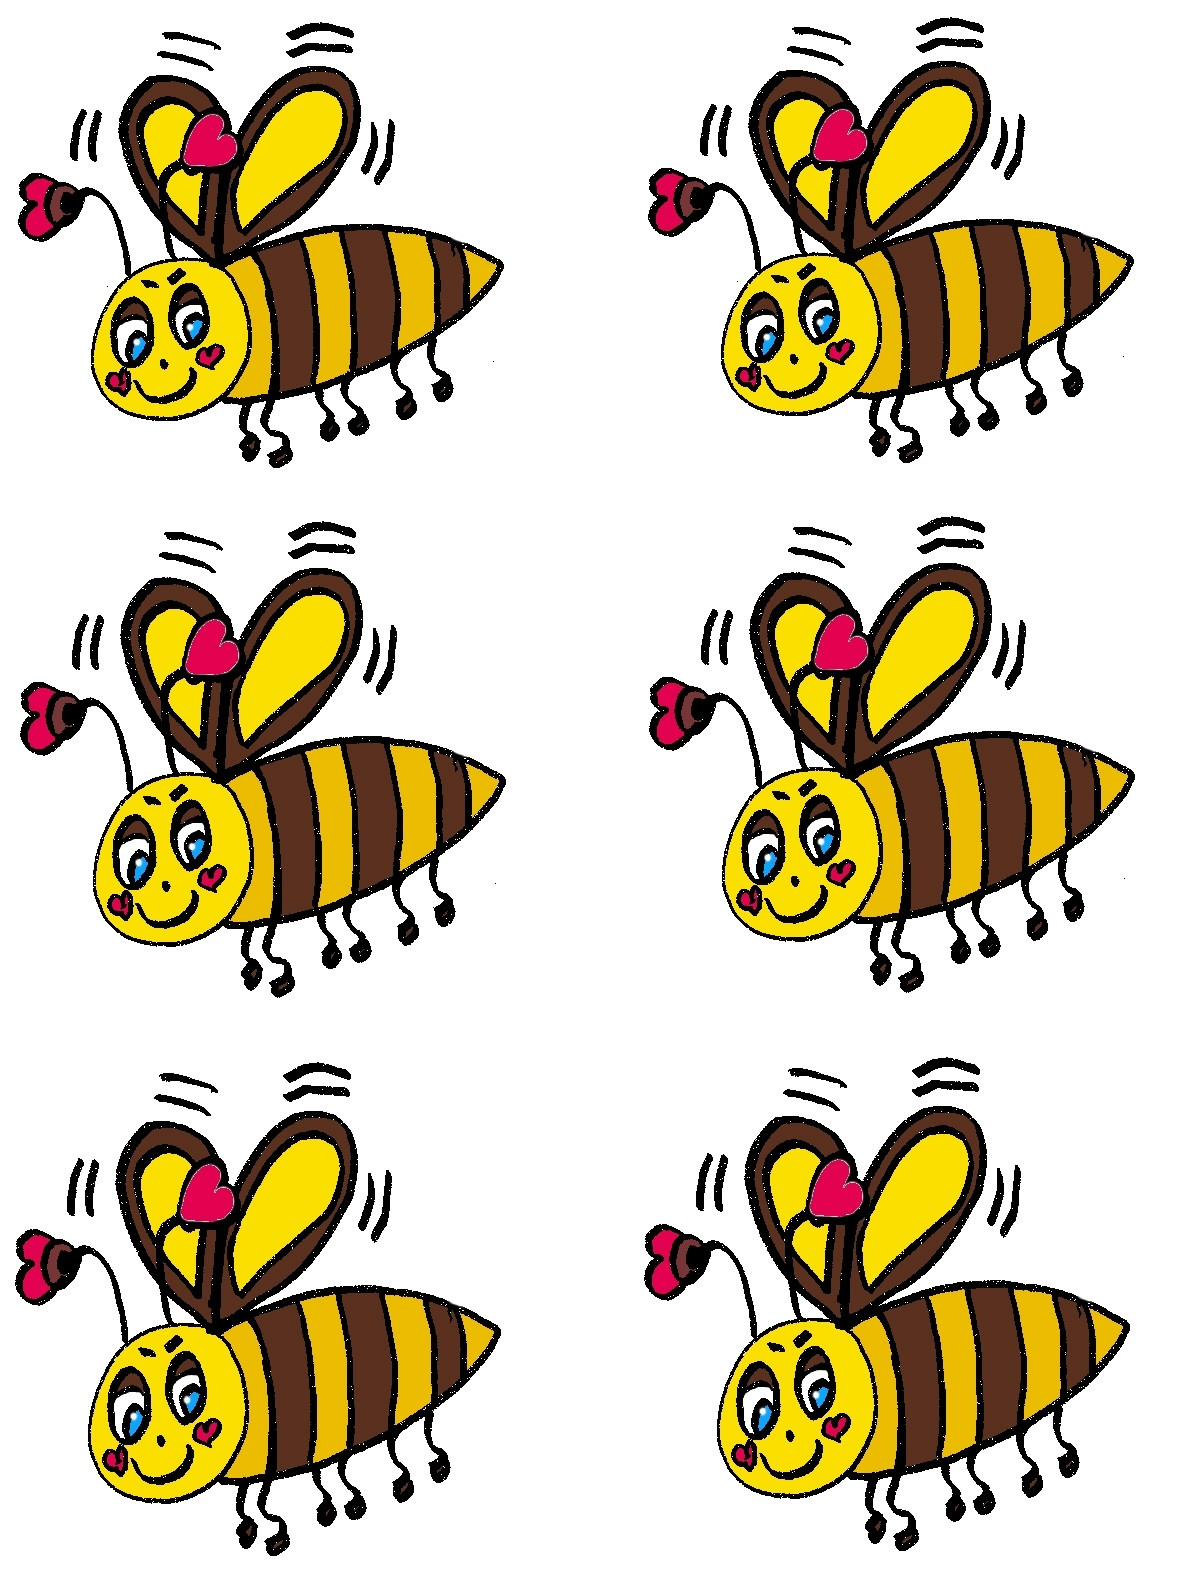 Christian Images In My Treasure Box: Home Drawn Cartoon Bees ...